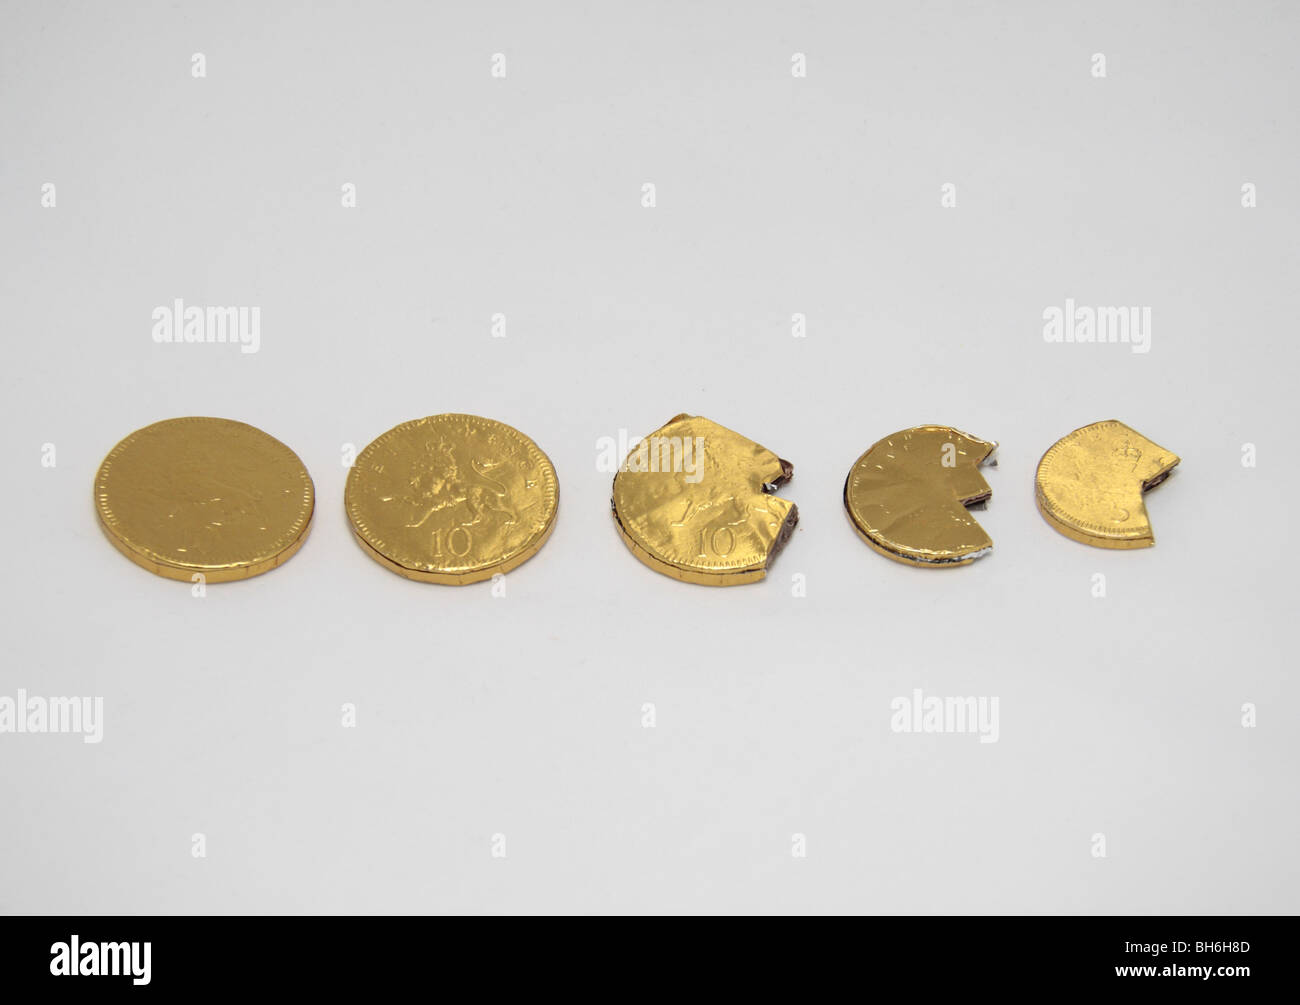 A line of slowly shrinking, disappearing chocolate coins symbolising depreciation, recession etc. Stock Photo